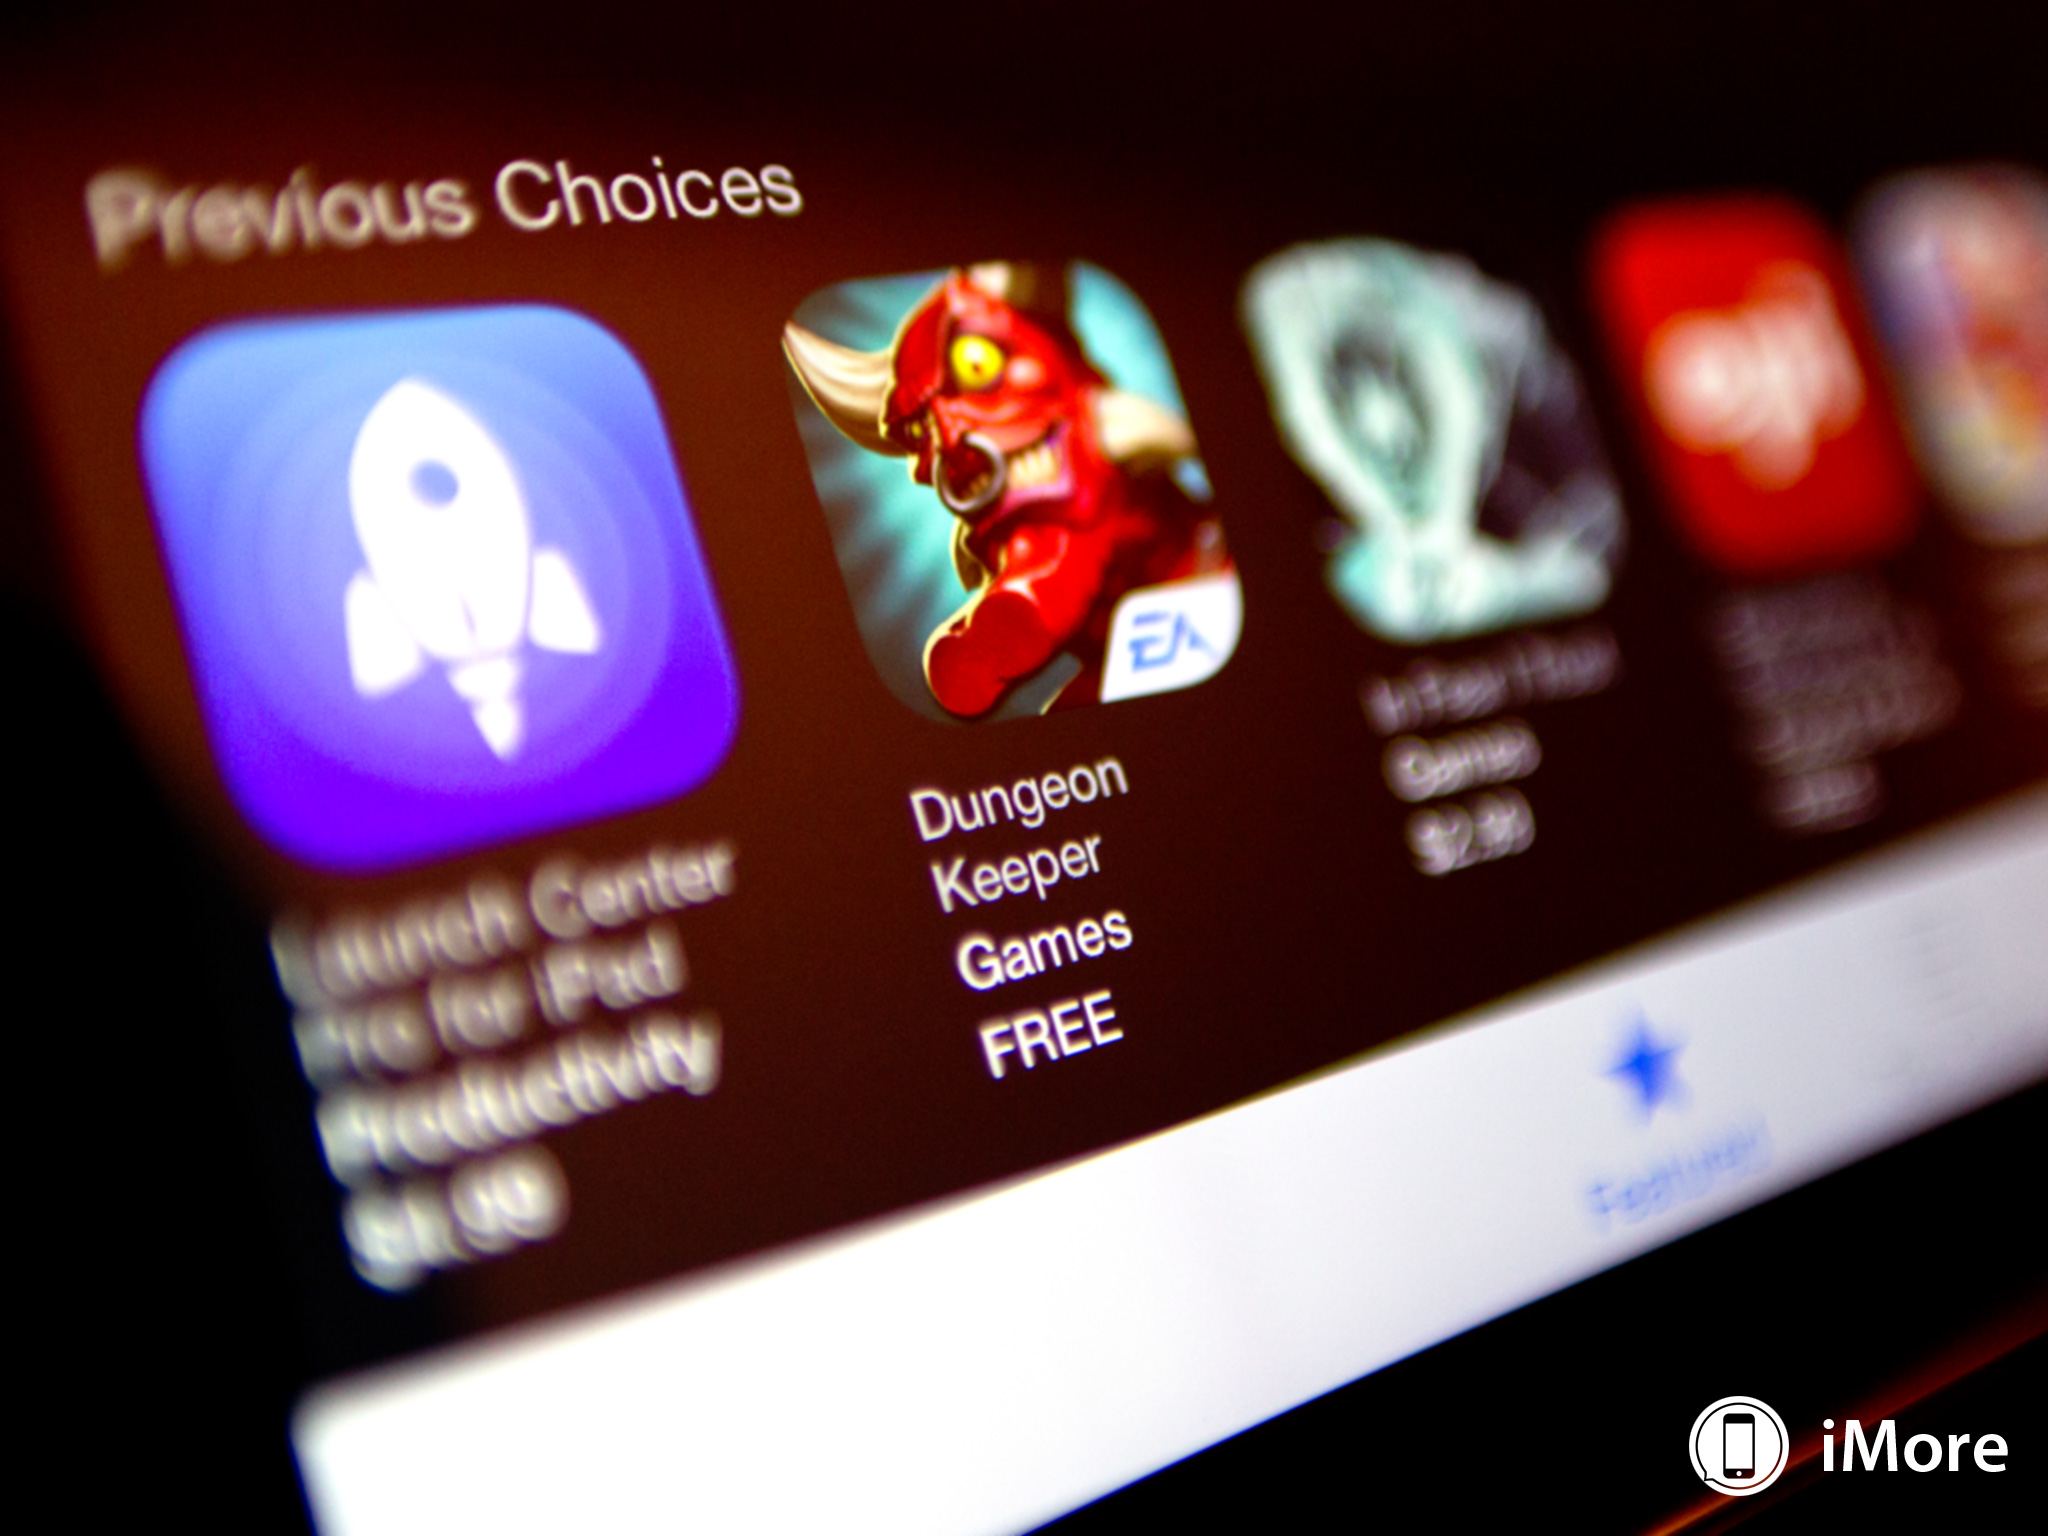 Dungeon Keeper in the Editor&#39;s choice section